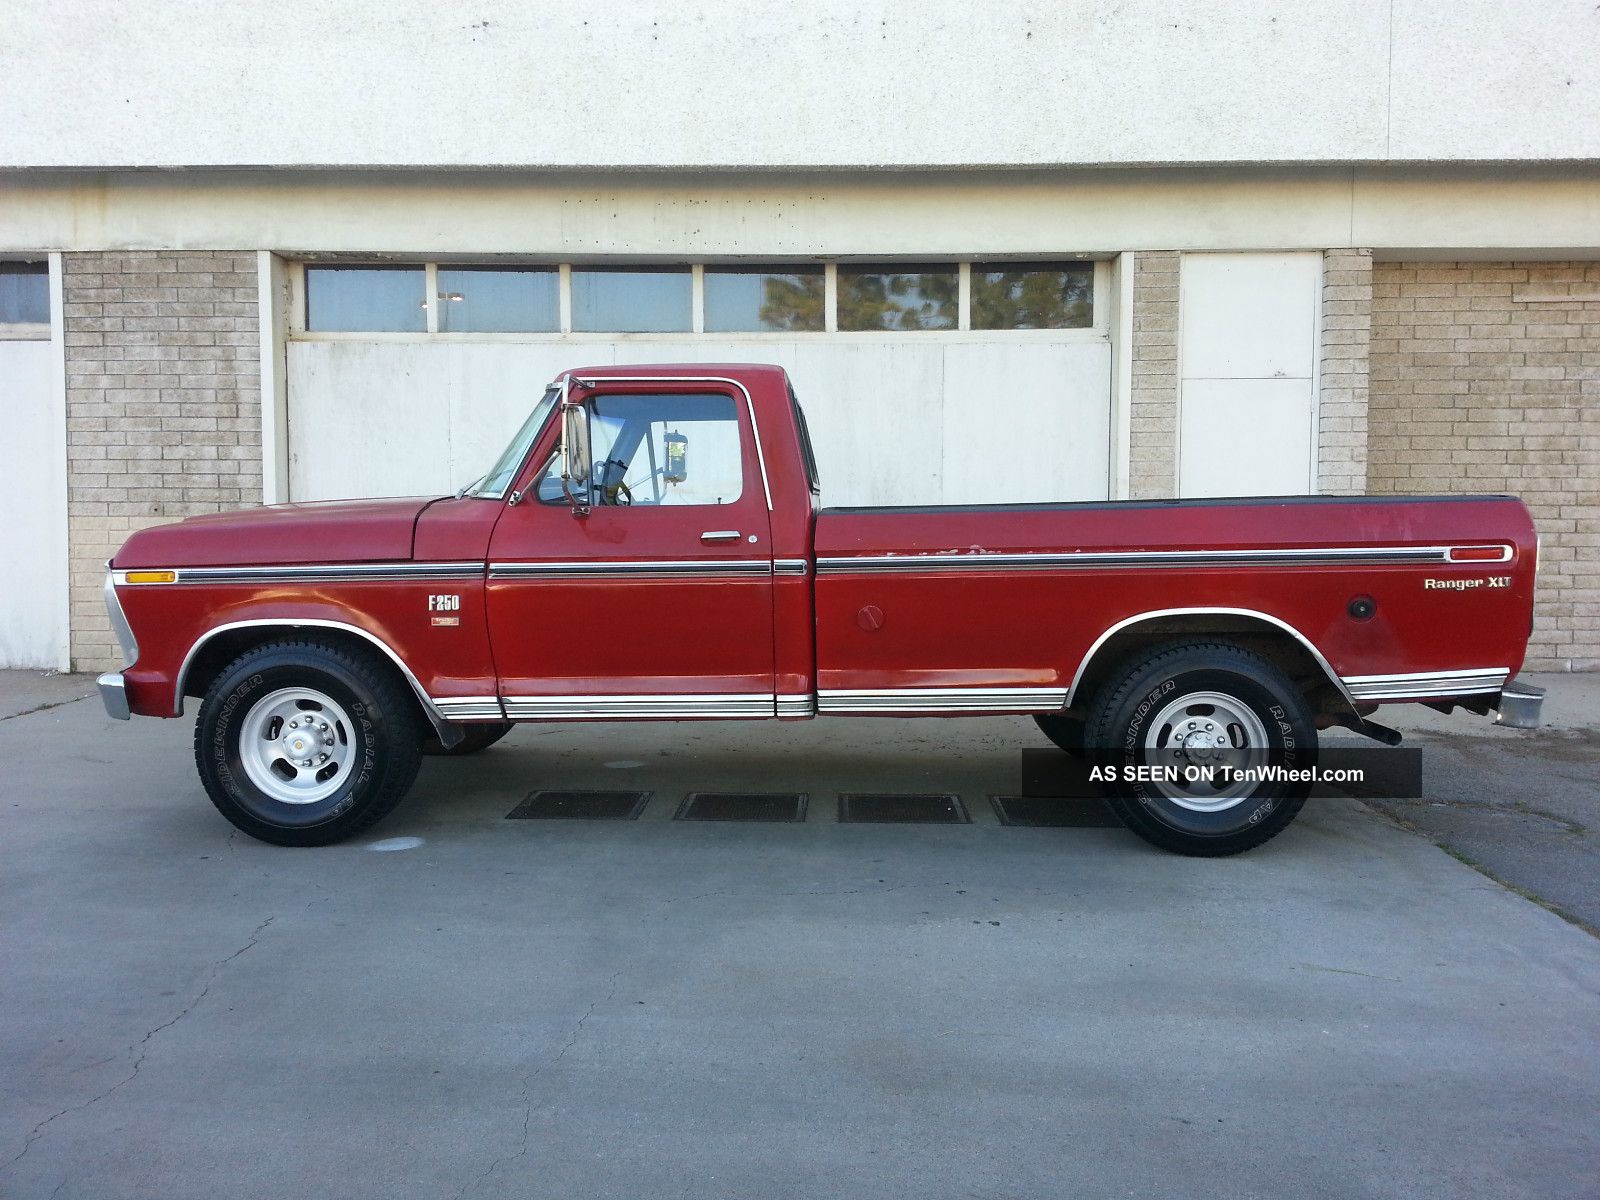 1976 Ford F250 Ranger Xlt 2wd 460 V8 Long Bed Automatic 76 ... 1970 ford f250 longbed stepside 